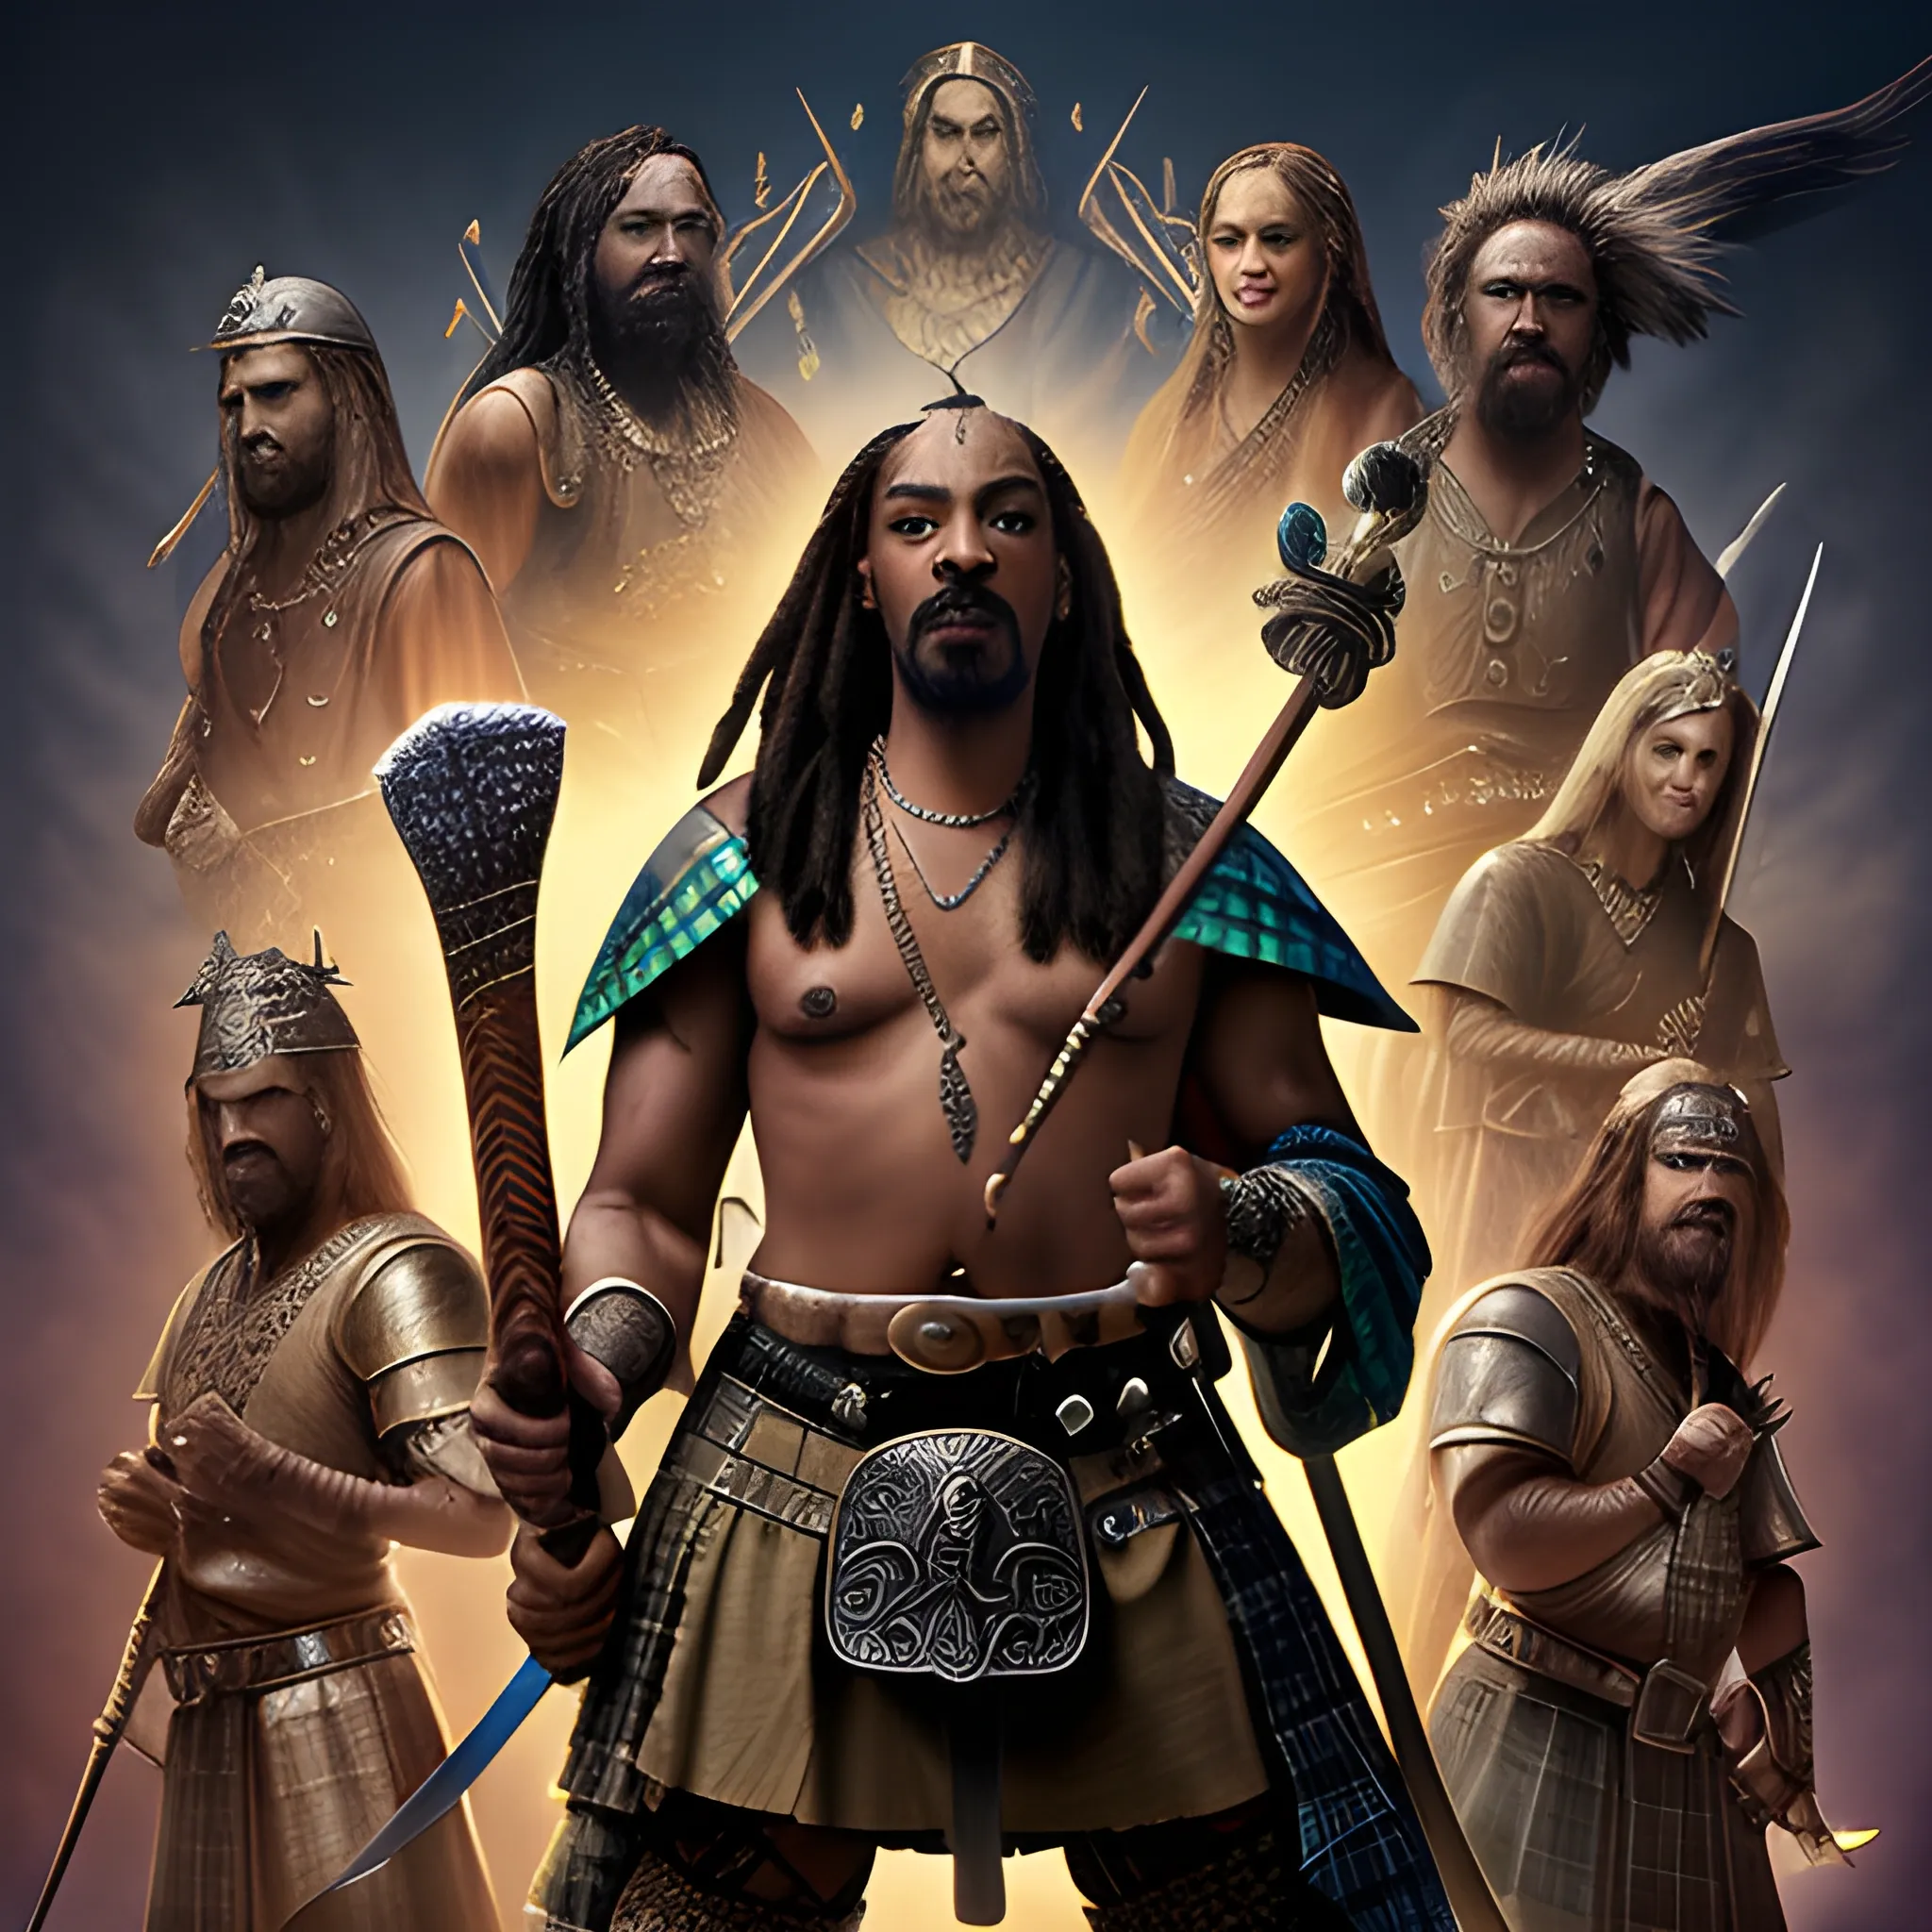 "Create a captivating fantasy depiction that combines the iconic presence of Braveheart with the unique essence of Snoop Dogg. Imagine a realm where epic battles and magical realms converge. Visualize Snoop Dogg transformed into a valiant warrior, adorned in the attire of a medieval hero like William Wallace from Braveheart. Envision him wielding a musical staff that emanates enchanting melodies, capable of both inspiring his allies and mesmerizing his foes. Surround him with a diverse group of fantastical companions, each representing a different aspect of his persona. Whether it's his signature cool demeanor, his love for music, or his fierce determination, let these elements seamlessly blend into this one-of-a-kind portrayal. Capture the essence of courage, charisma, and creativity in this mythical interpretation of Snoop Dogg as a Braveheart-inspired hero in a world of magic and valor."